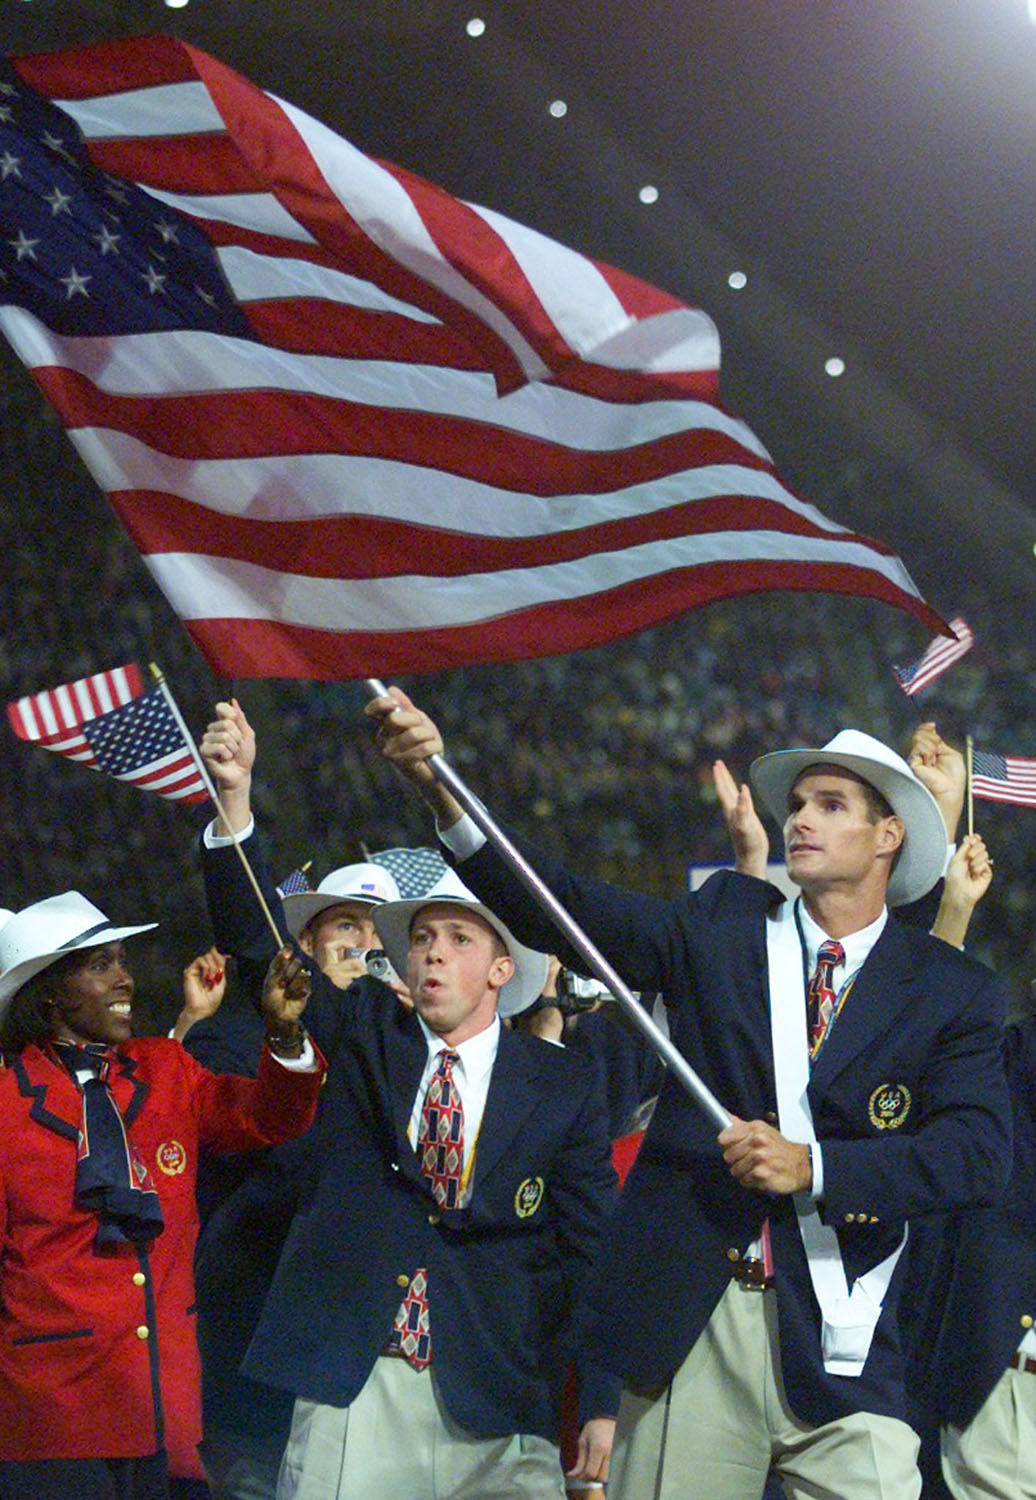 American canoeist Cliff Meidl carries his country's flag during the opening ceremony of Sydney's Olympic Games, Sept. 15, 2000.